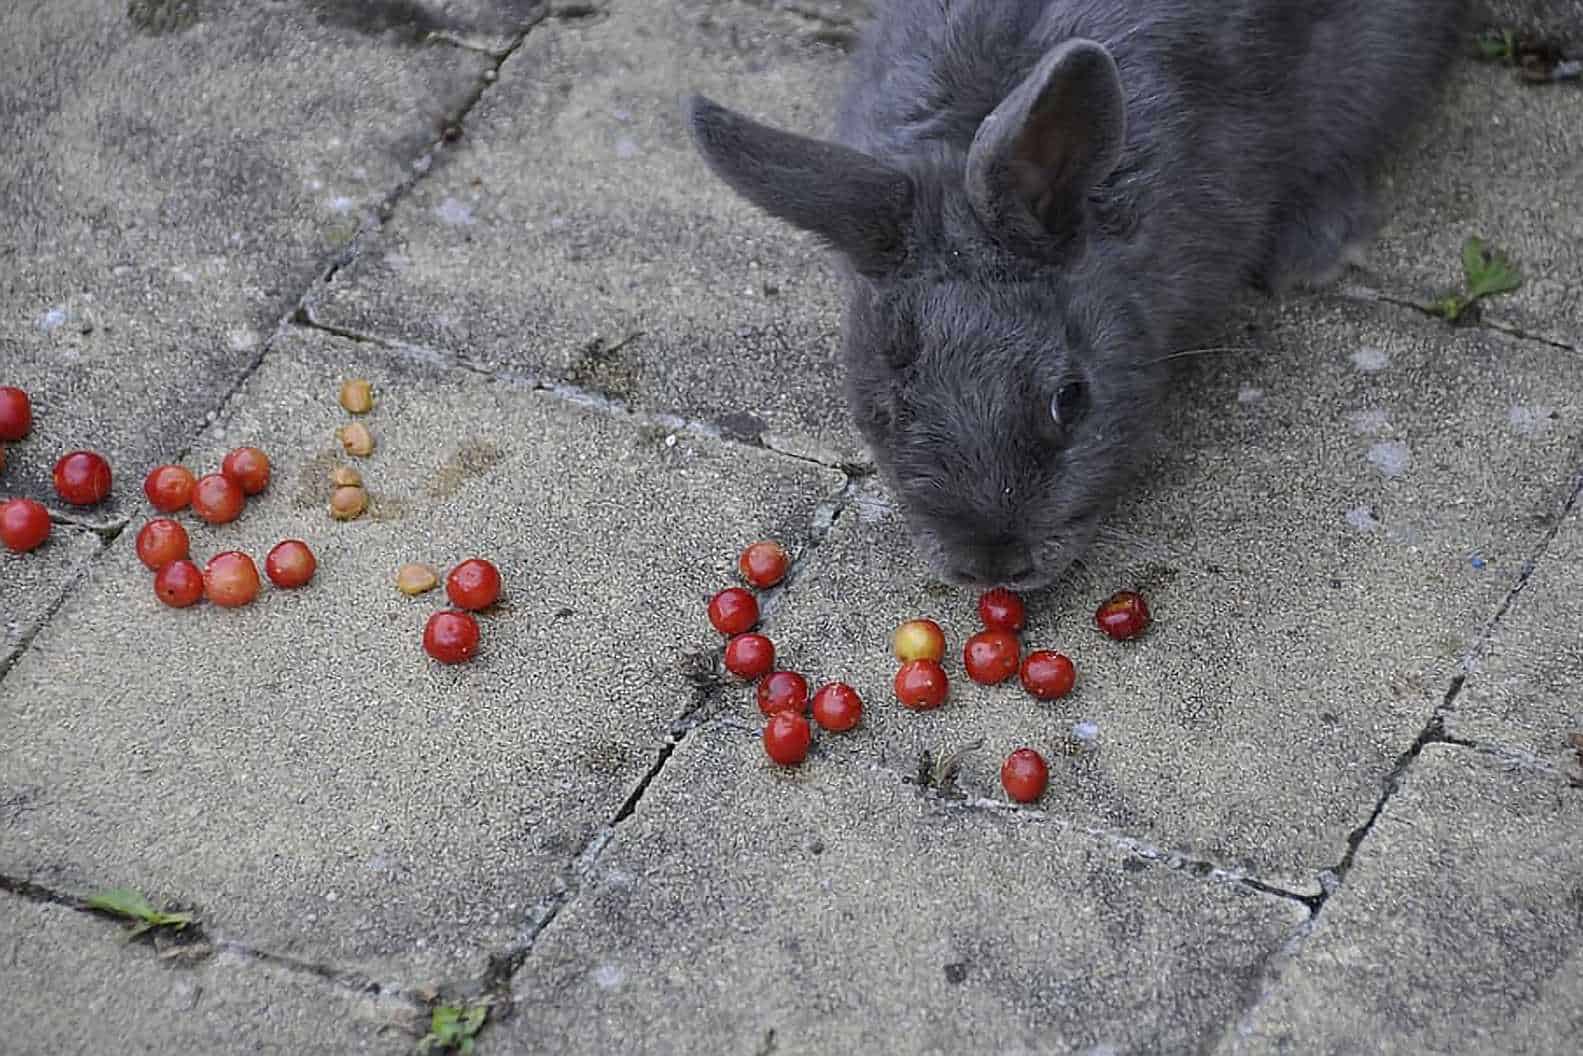 5 Things to Know About Feeding Cherries to Rabbits